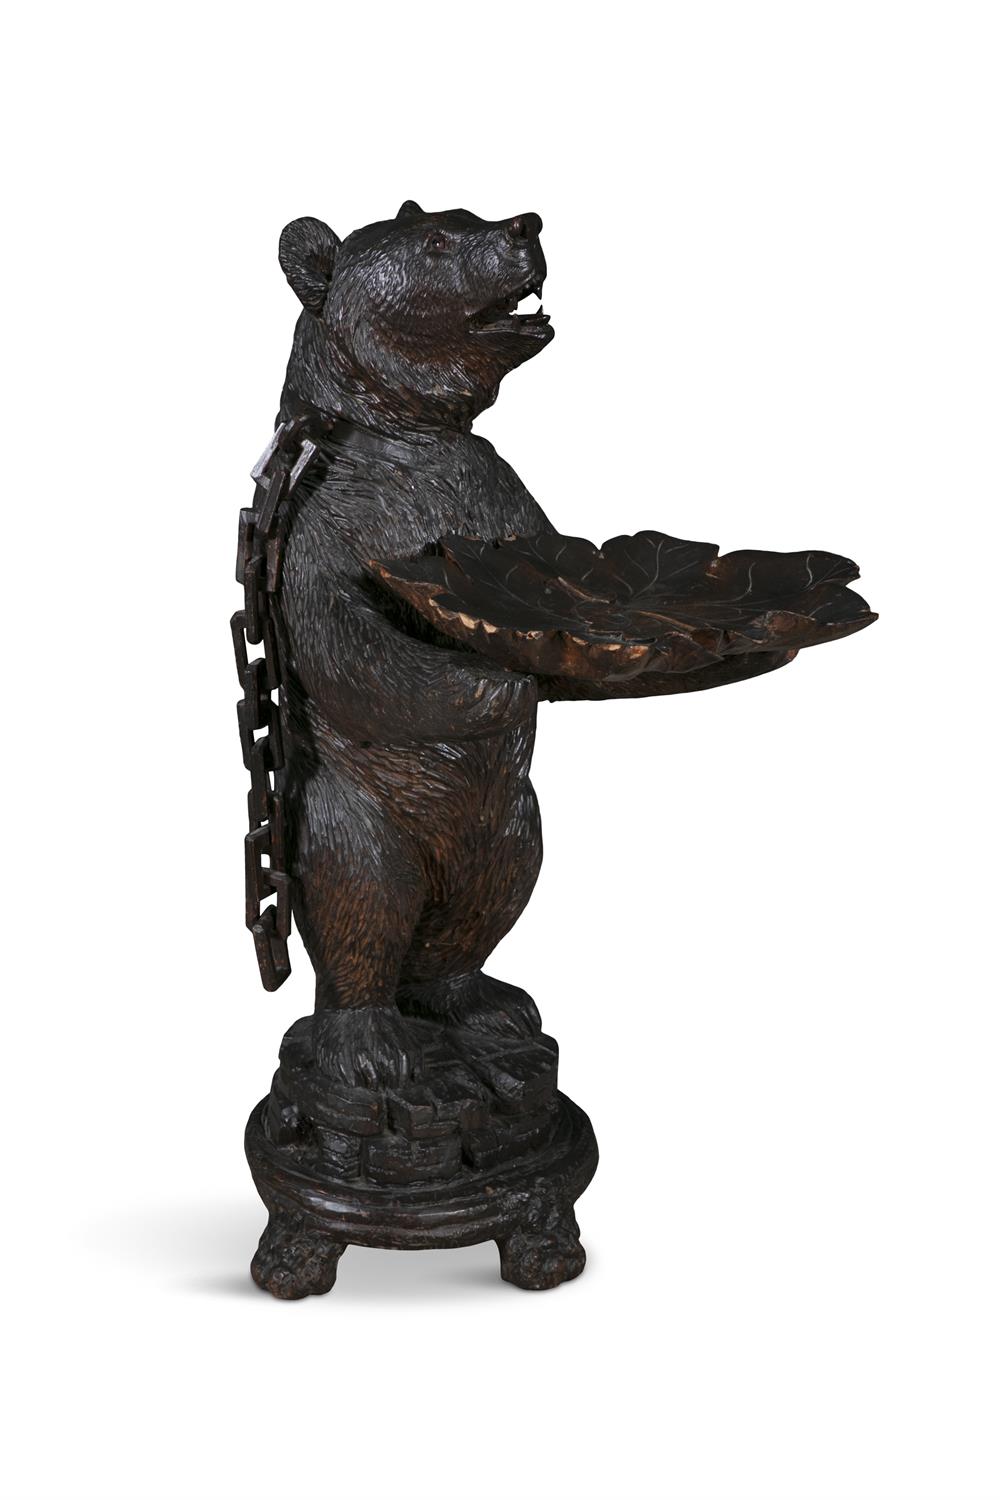 A SWISS 'BLACK FOREST' LINDEN WOOD BEAR, 19TH CENTURY modelled standing upright with - Image 8 of 12